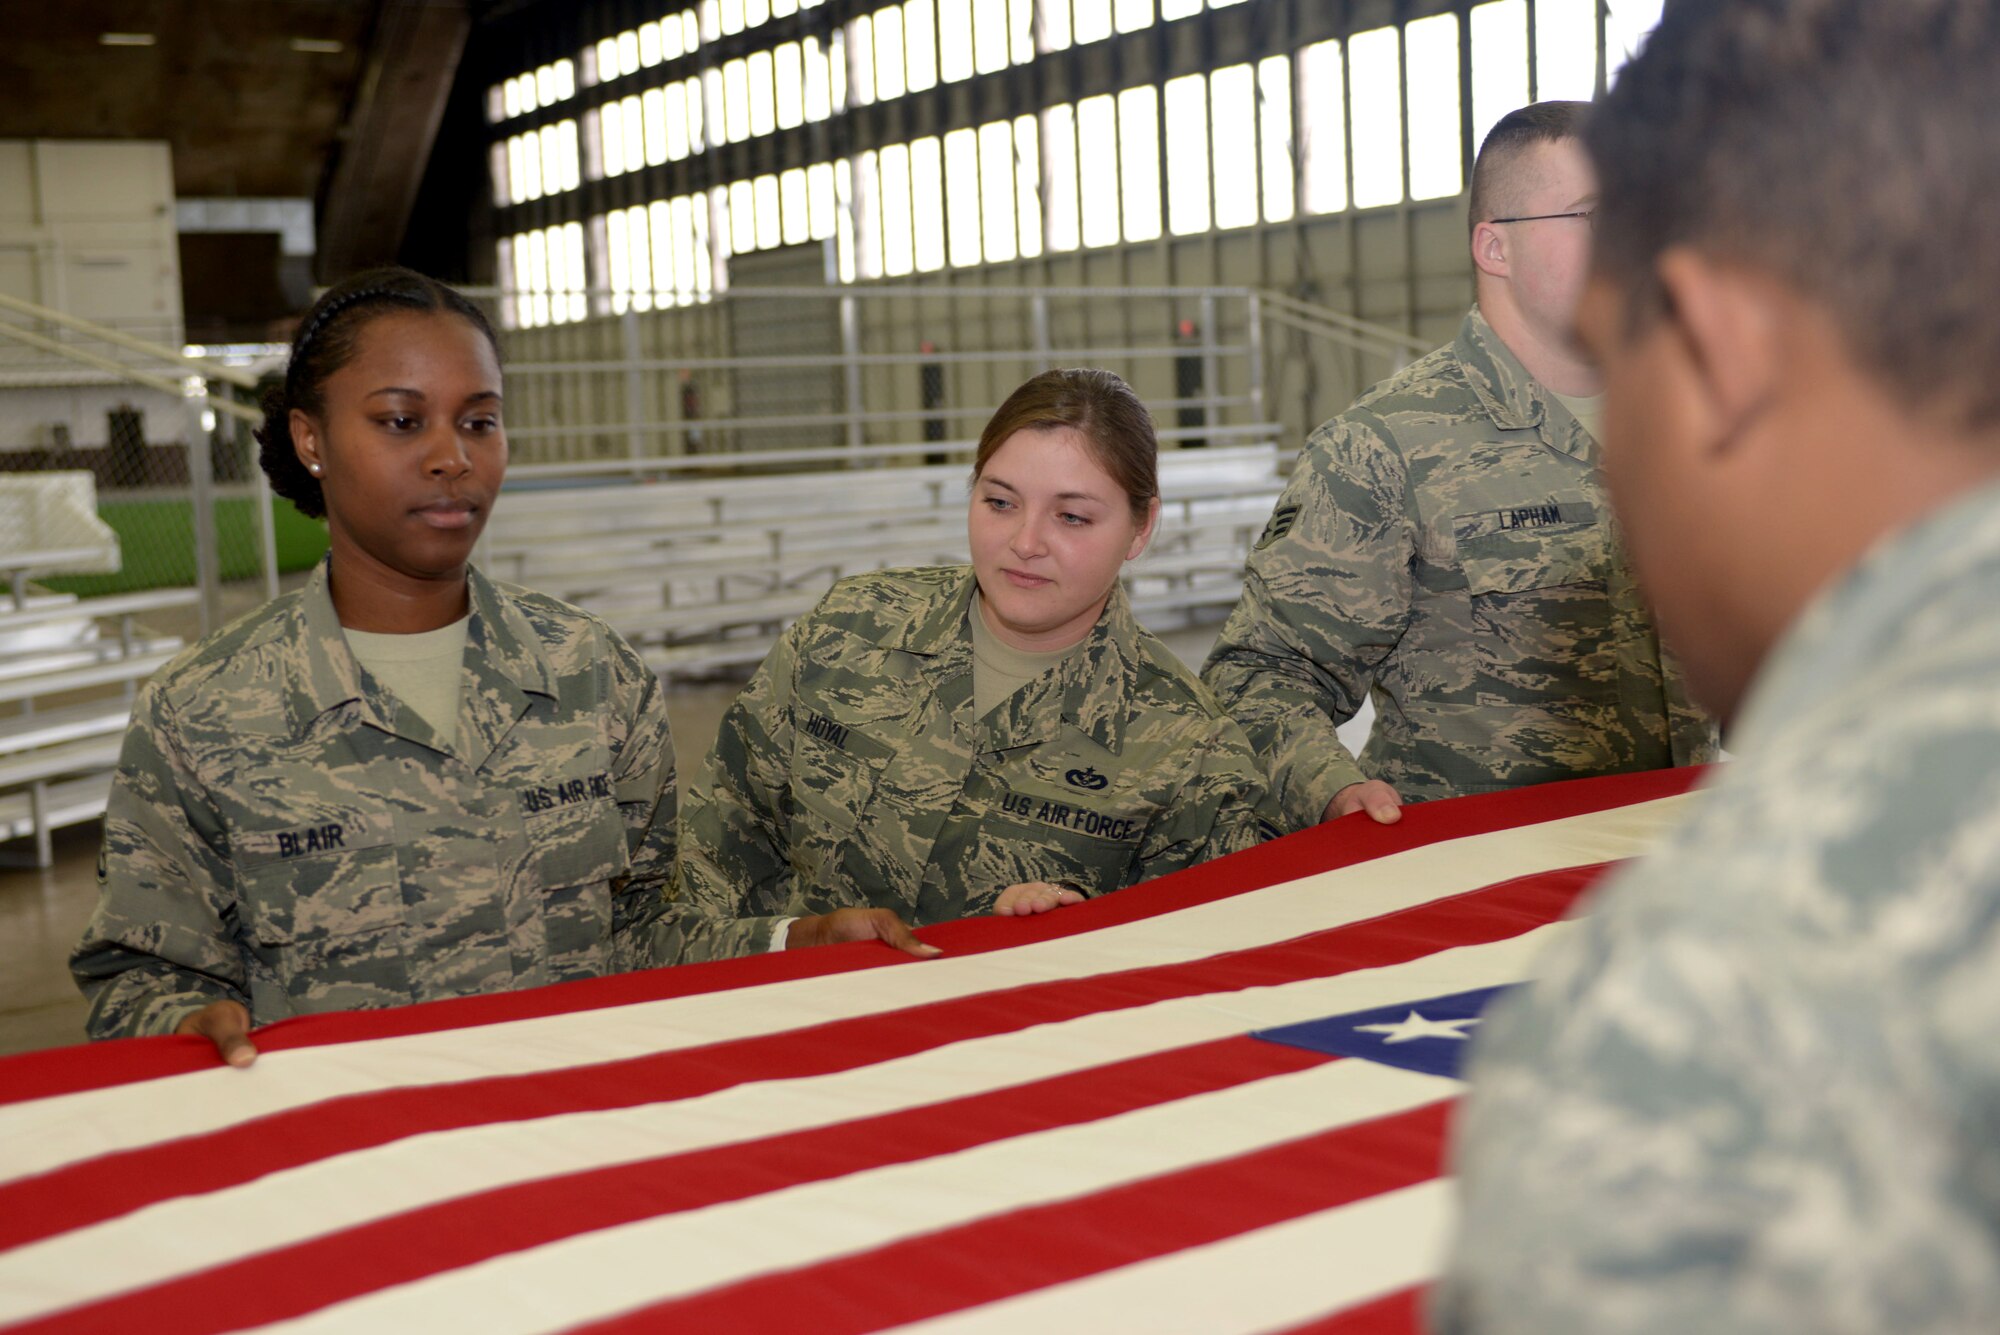 Staff Sgt. Michelle Hoyal, an honor guard flight sergeant assigned to the 28th Force Support Squadron, ensures drills are performed properly at Ellsworth Air Force Base, S.D., Dec. 2, 2016. During funeral ceremonies, members of the Ellsworth Honor Guard fold the U.S. flag in honor of the fallen servicemember and present it to the servicemember’s next of kin. (U.S. Air Force photo by Airman 1st Class Donald C. Knechtel)